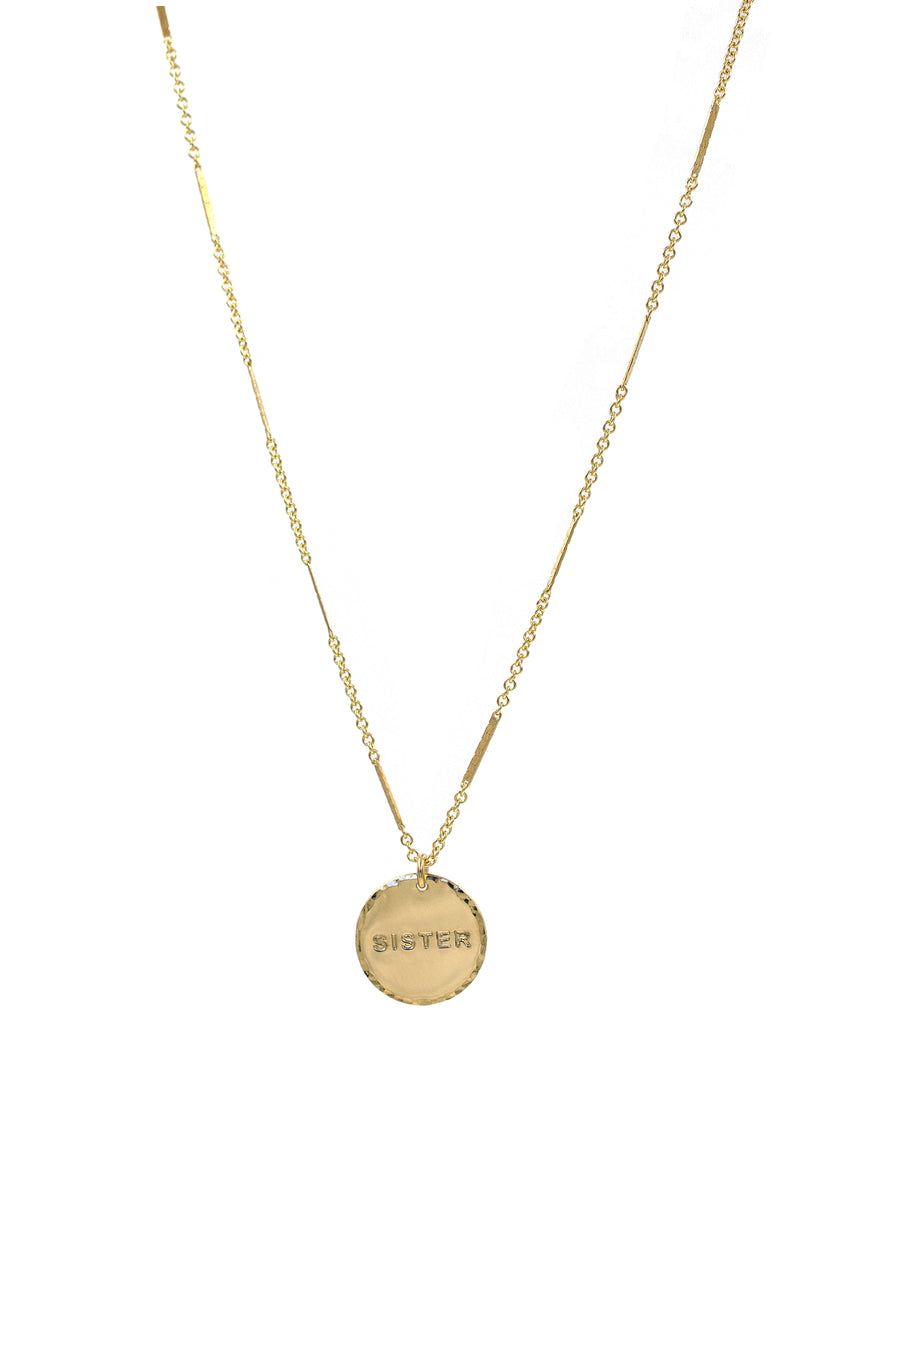 Sister Coin Necklace